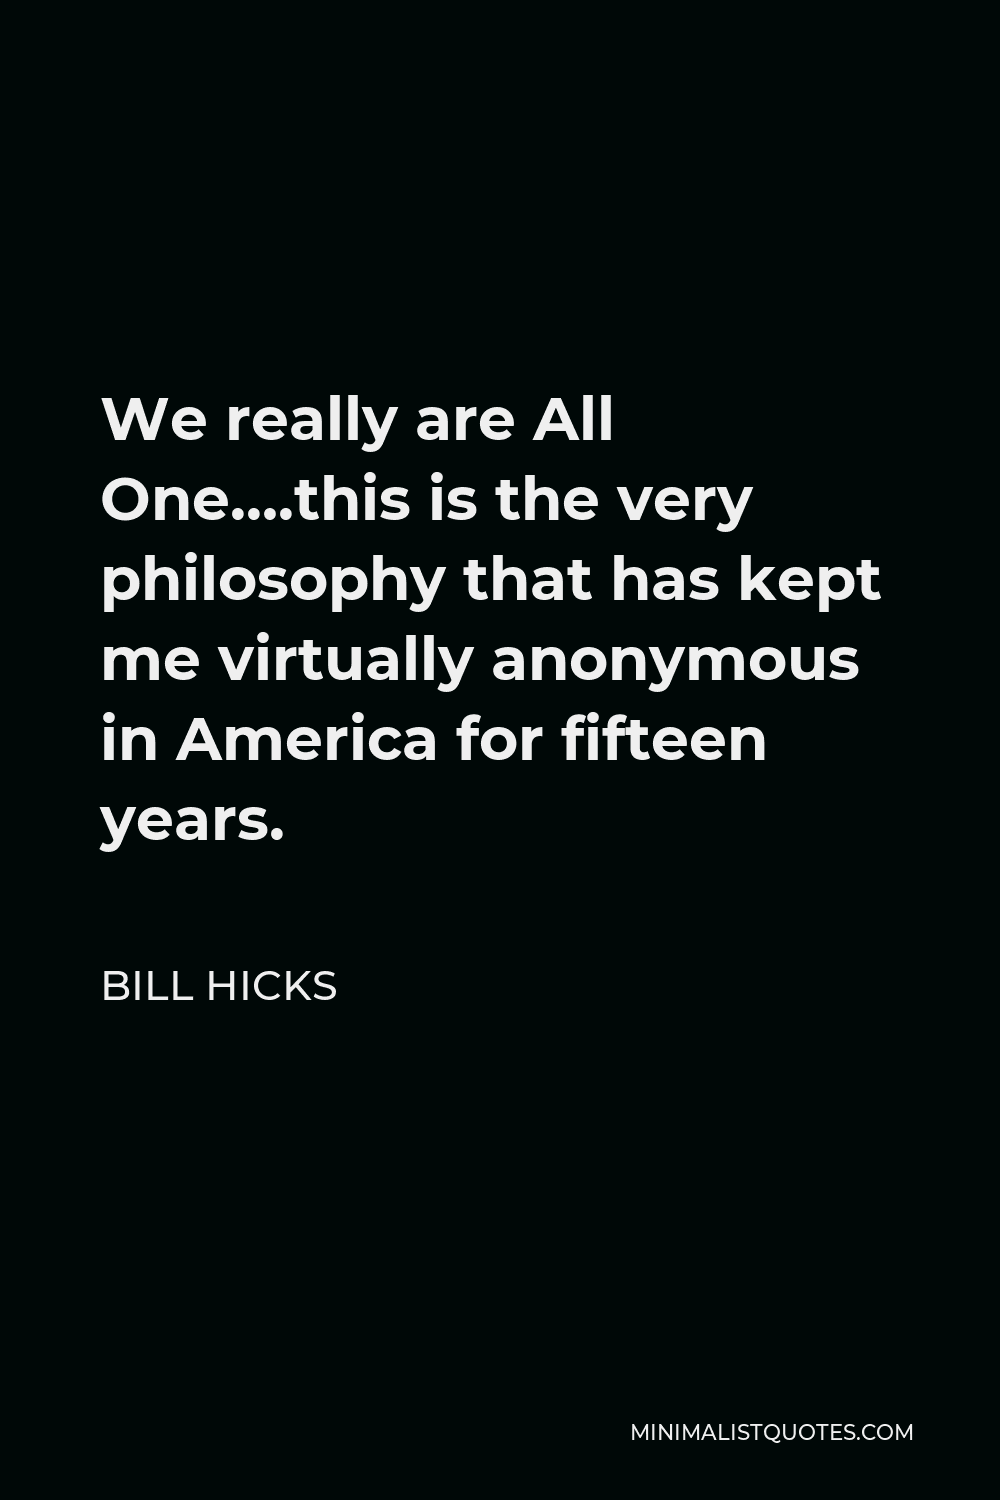 Bill Hicks Quote - We really are All One….this is the very philosophy that has kept me virtually anonymous in America for fifteen years.